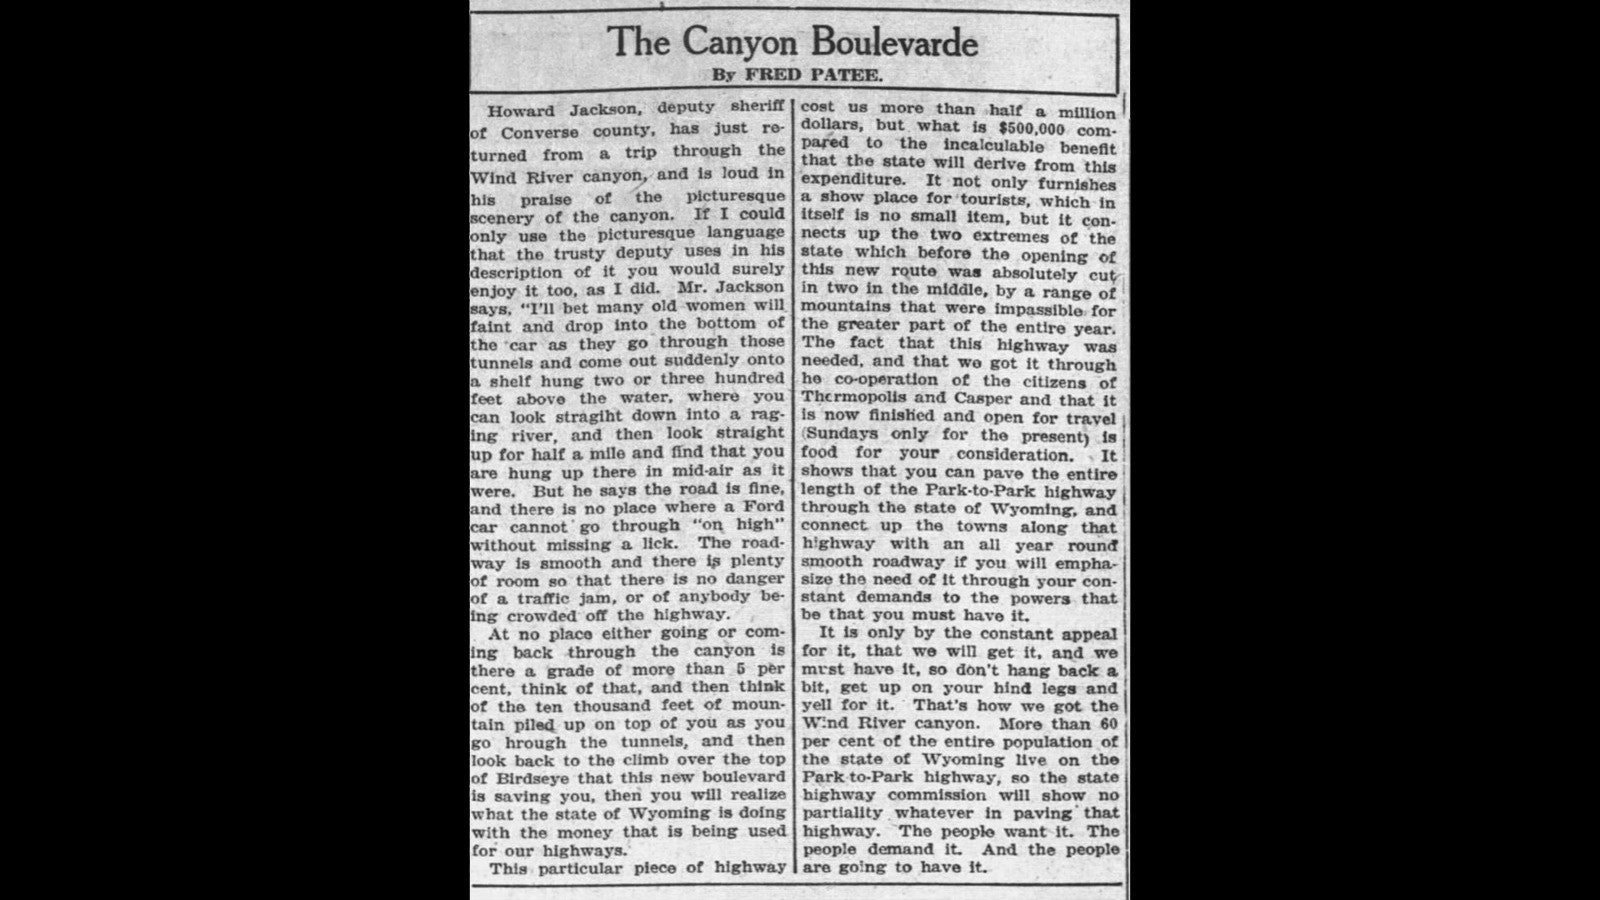 Wind River Canyon is the subject of this 1924 article in the Casper Star-Tribune.